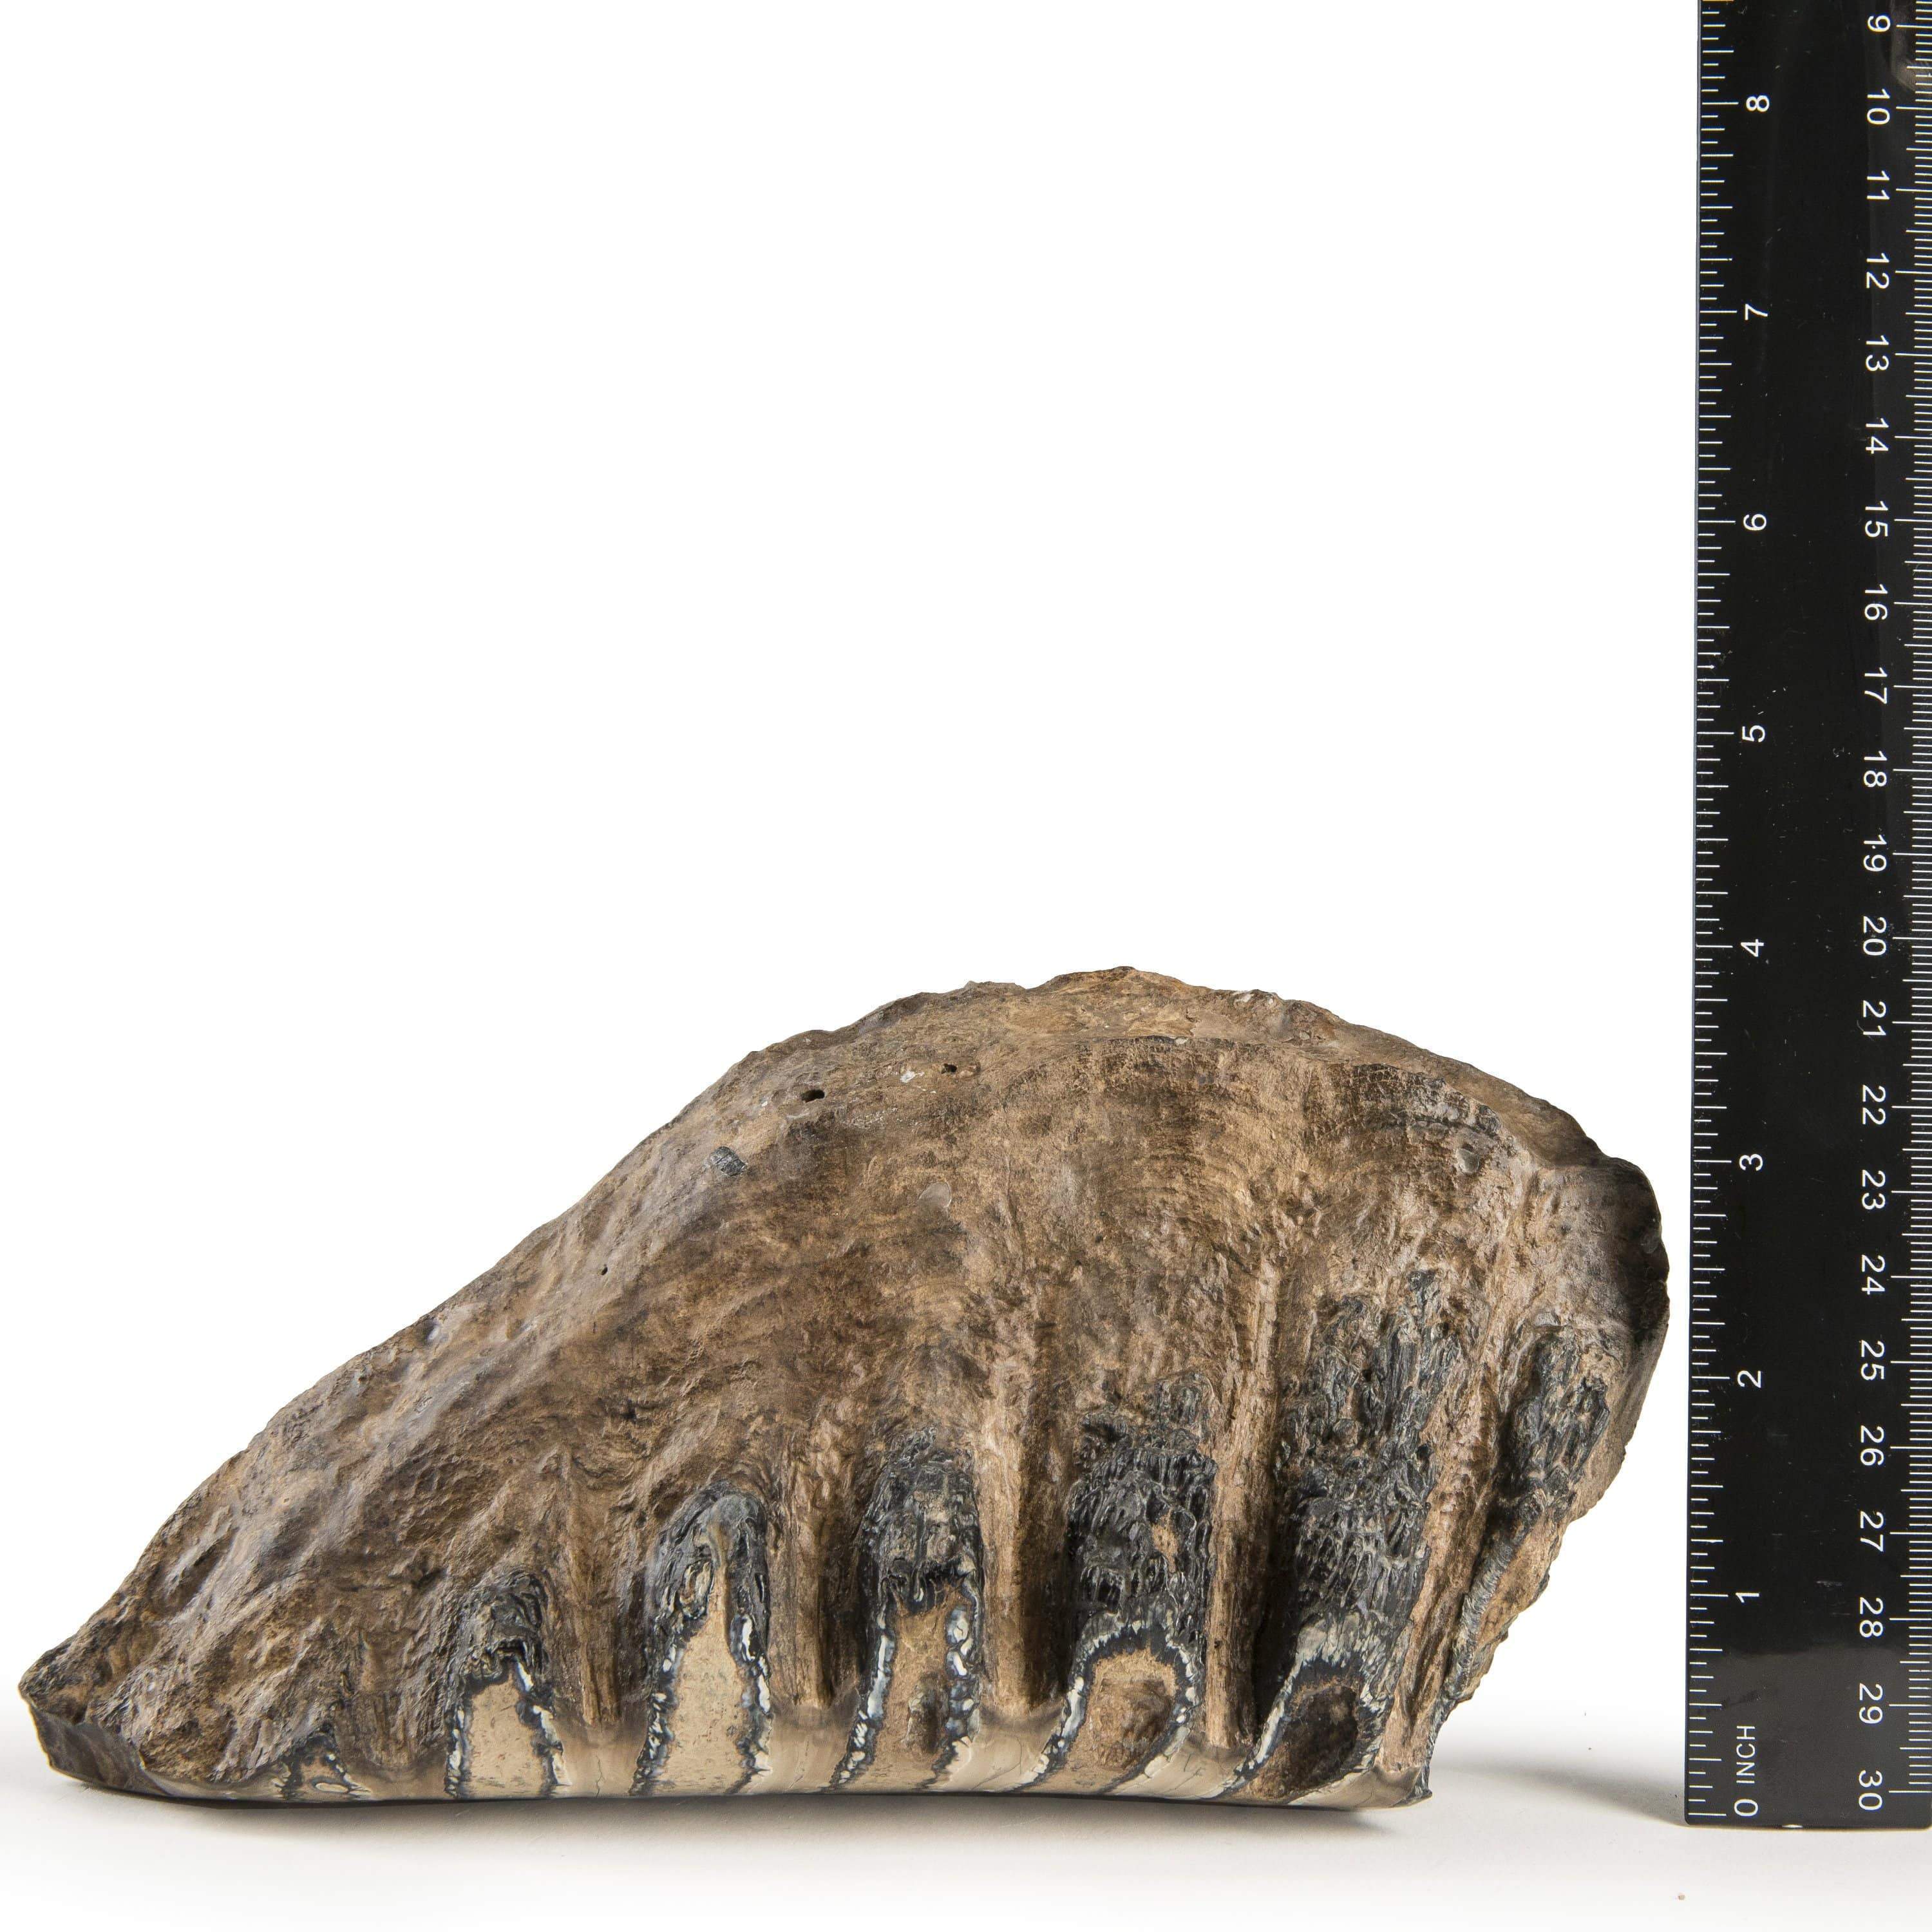 Kalifano Mammoth Molars Authentic Polished Columbian Mammoth Molar Section - 4 in WM4000.002